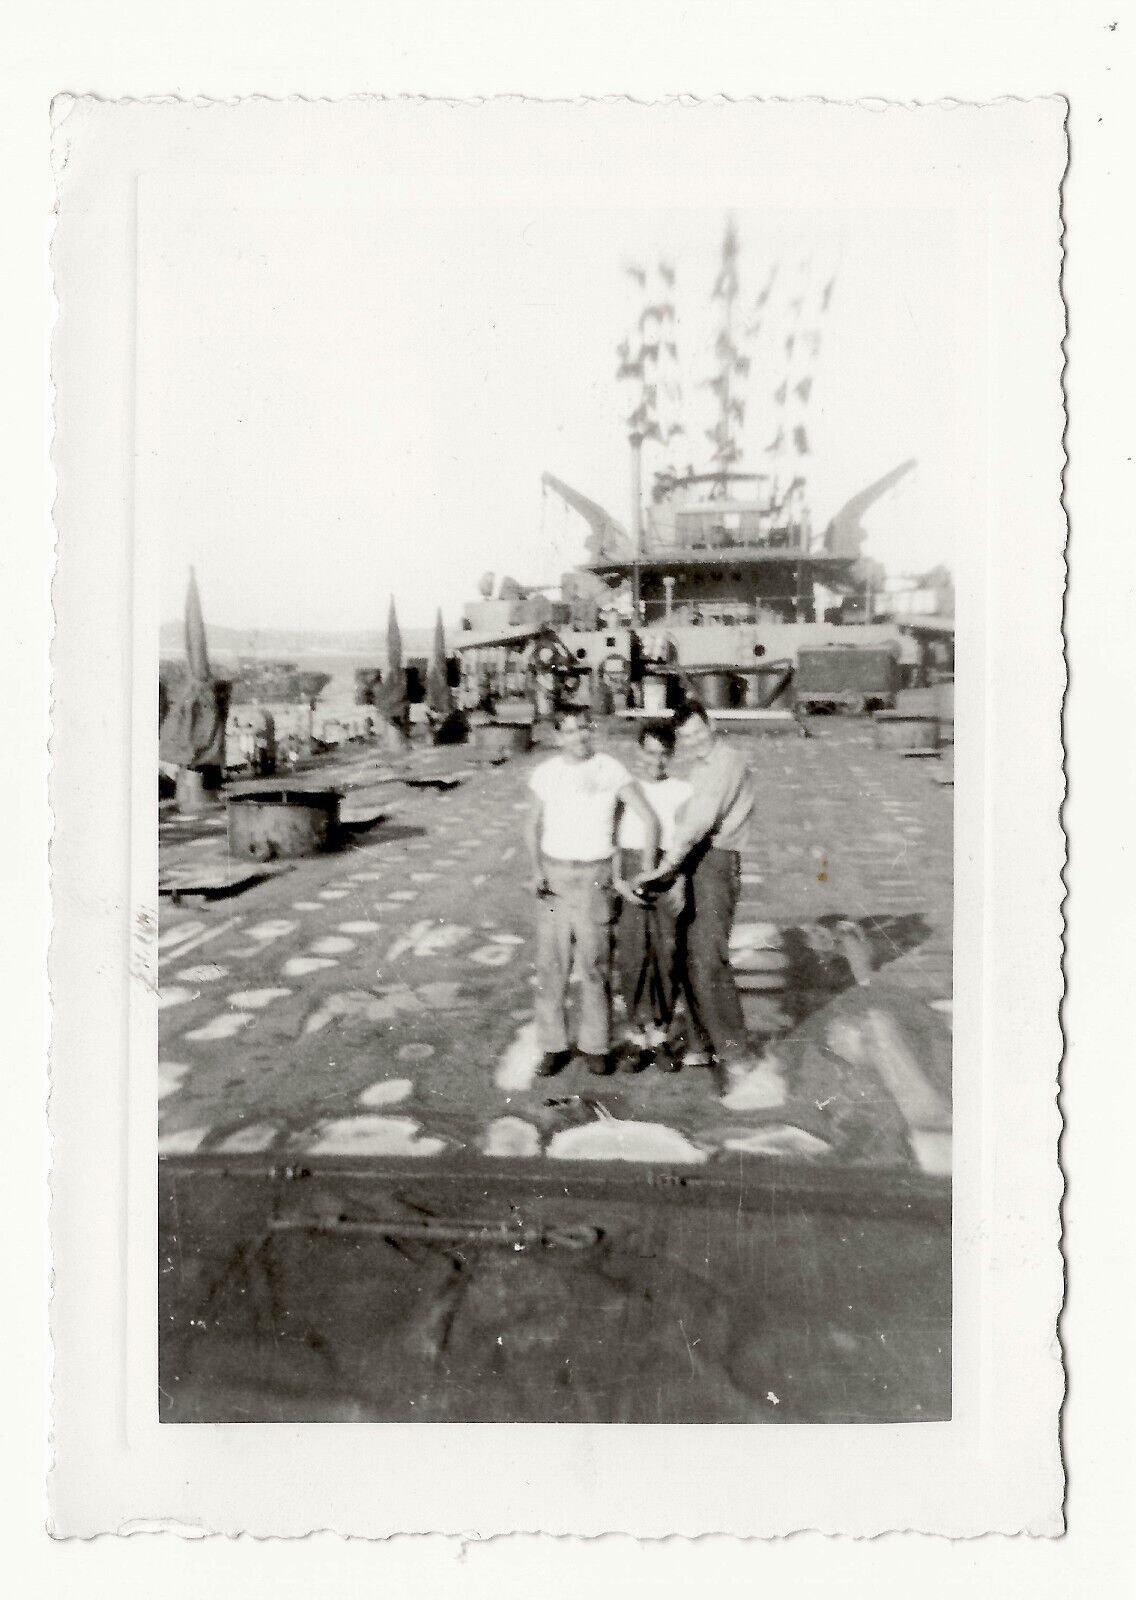 WWII U.S. Navy sailors on ship deck, silly, crotch snapshot photo, gay interest